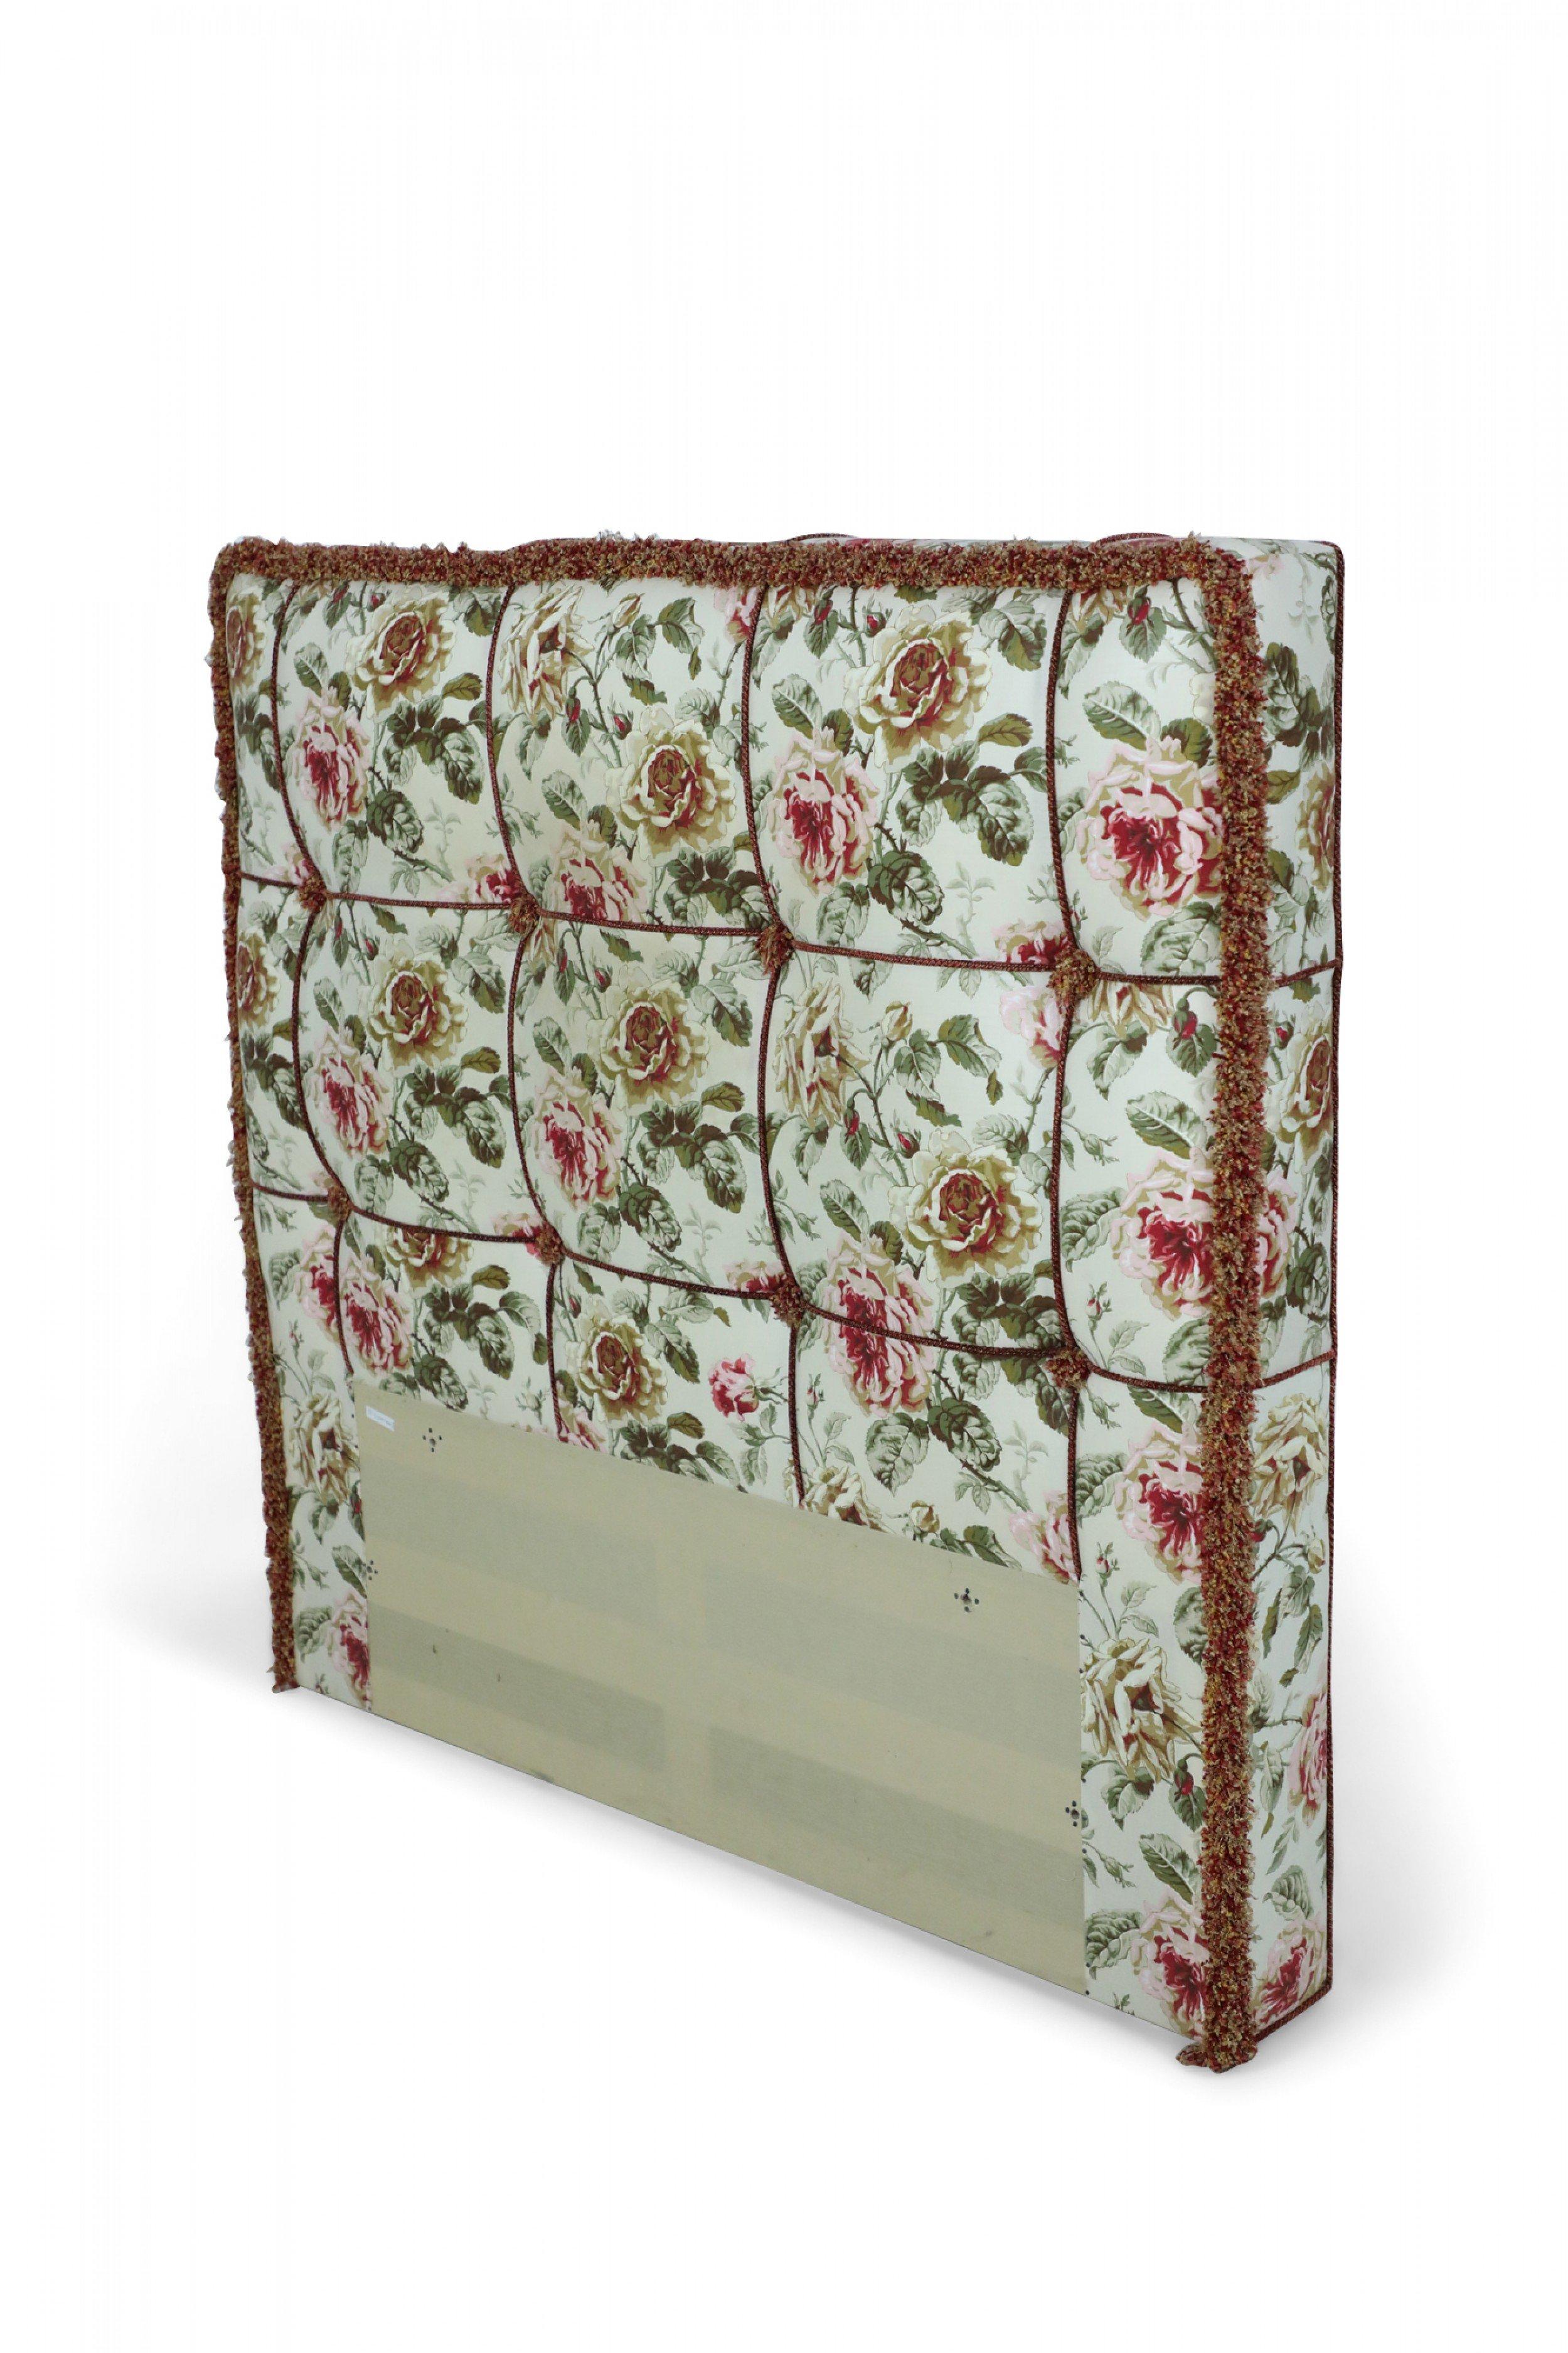 Pair of Contemporary floral printed twin/single-size upholstered headboards with piping, fringe and tufted details. (Headboards only, no footboards or rails).